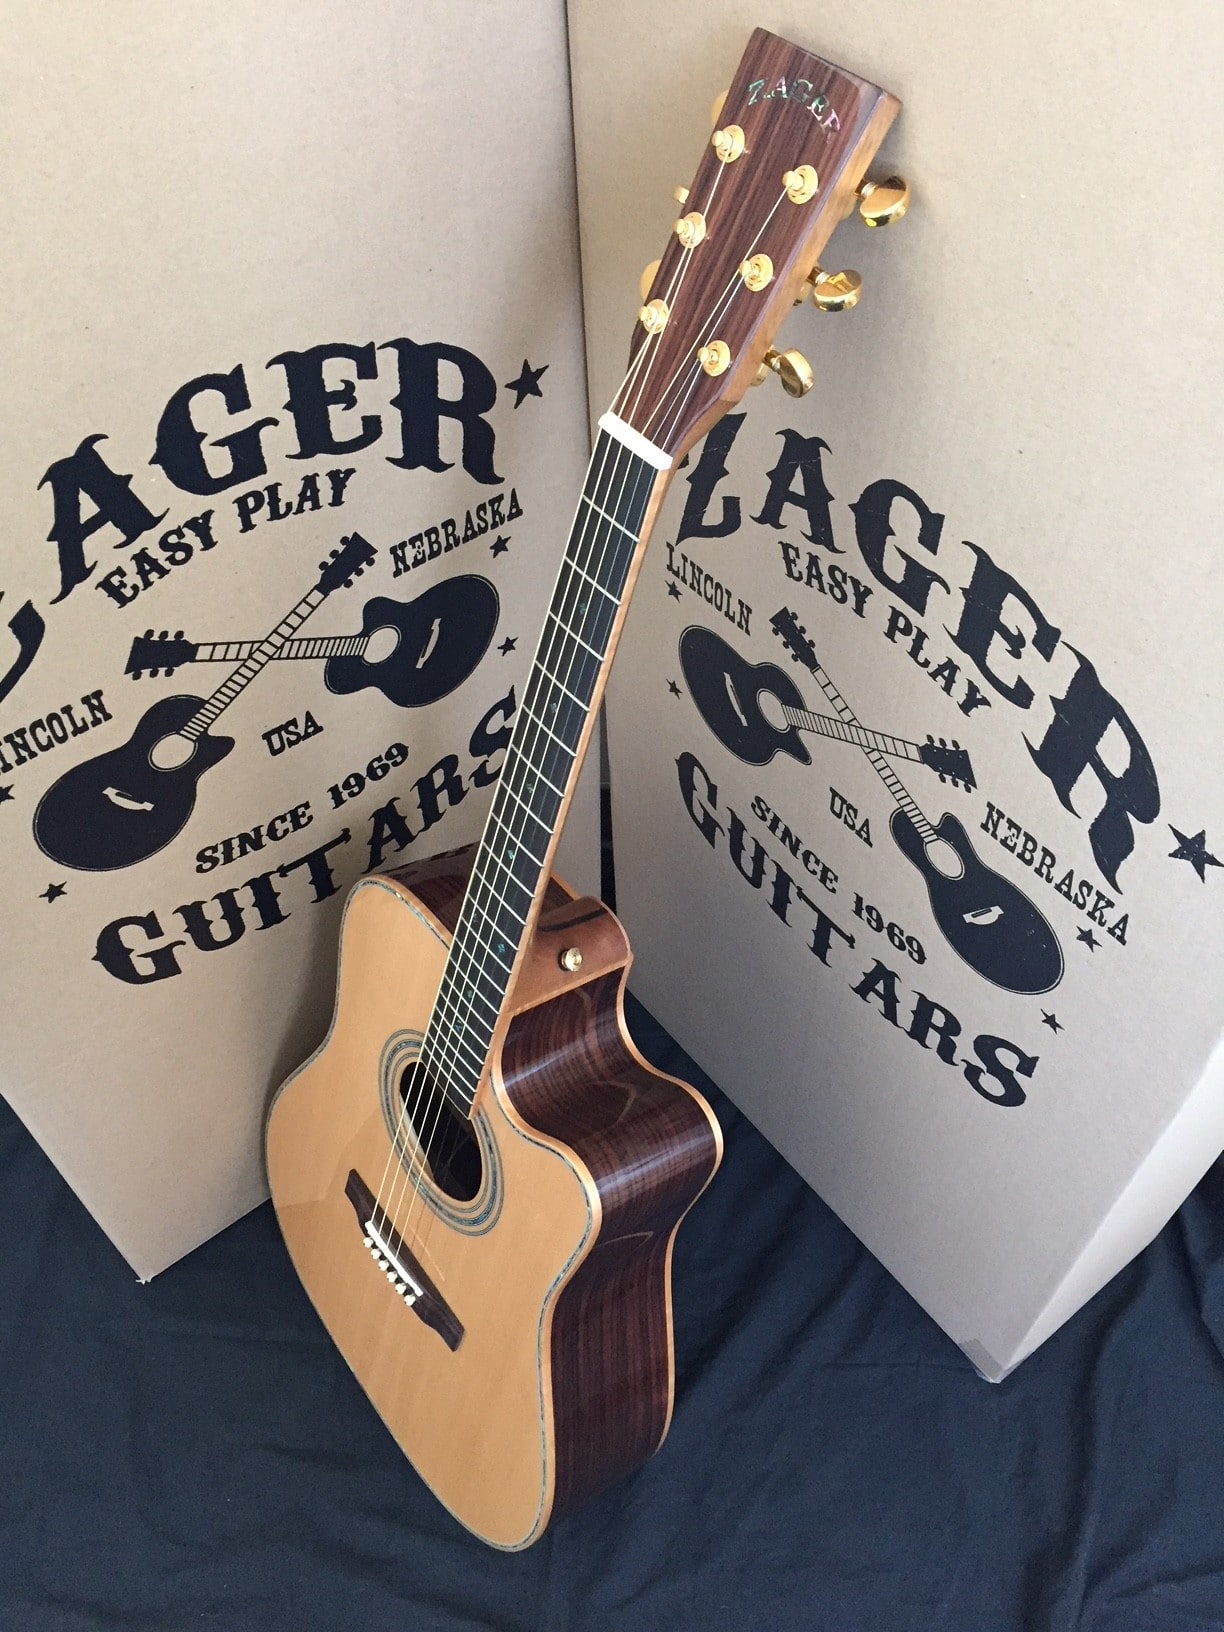 00013-900ce-acoustic-electric-discount-guitar-zager-guitars